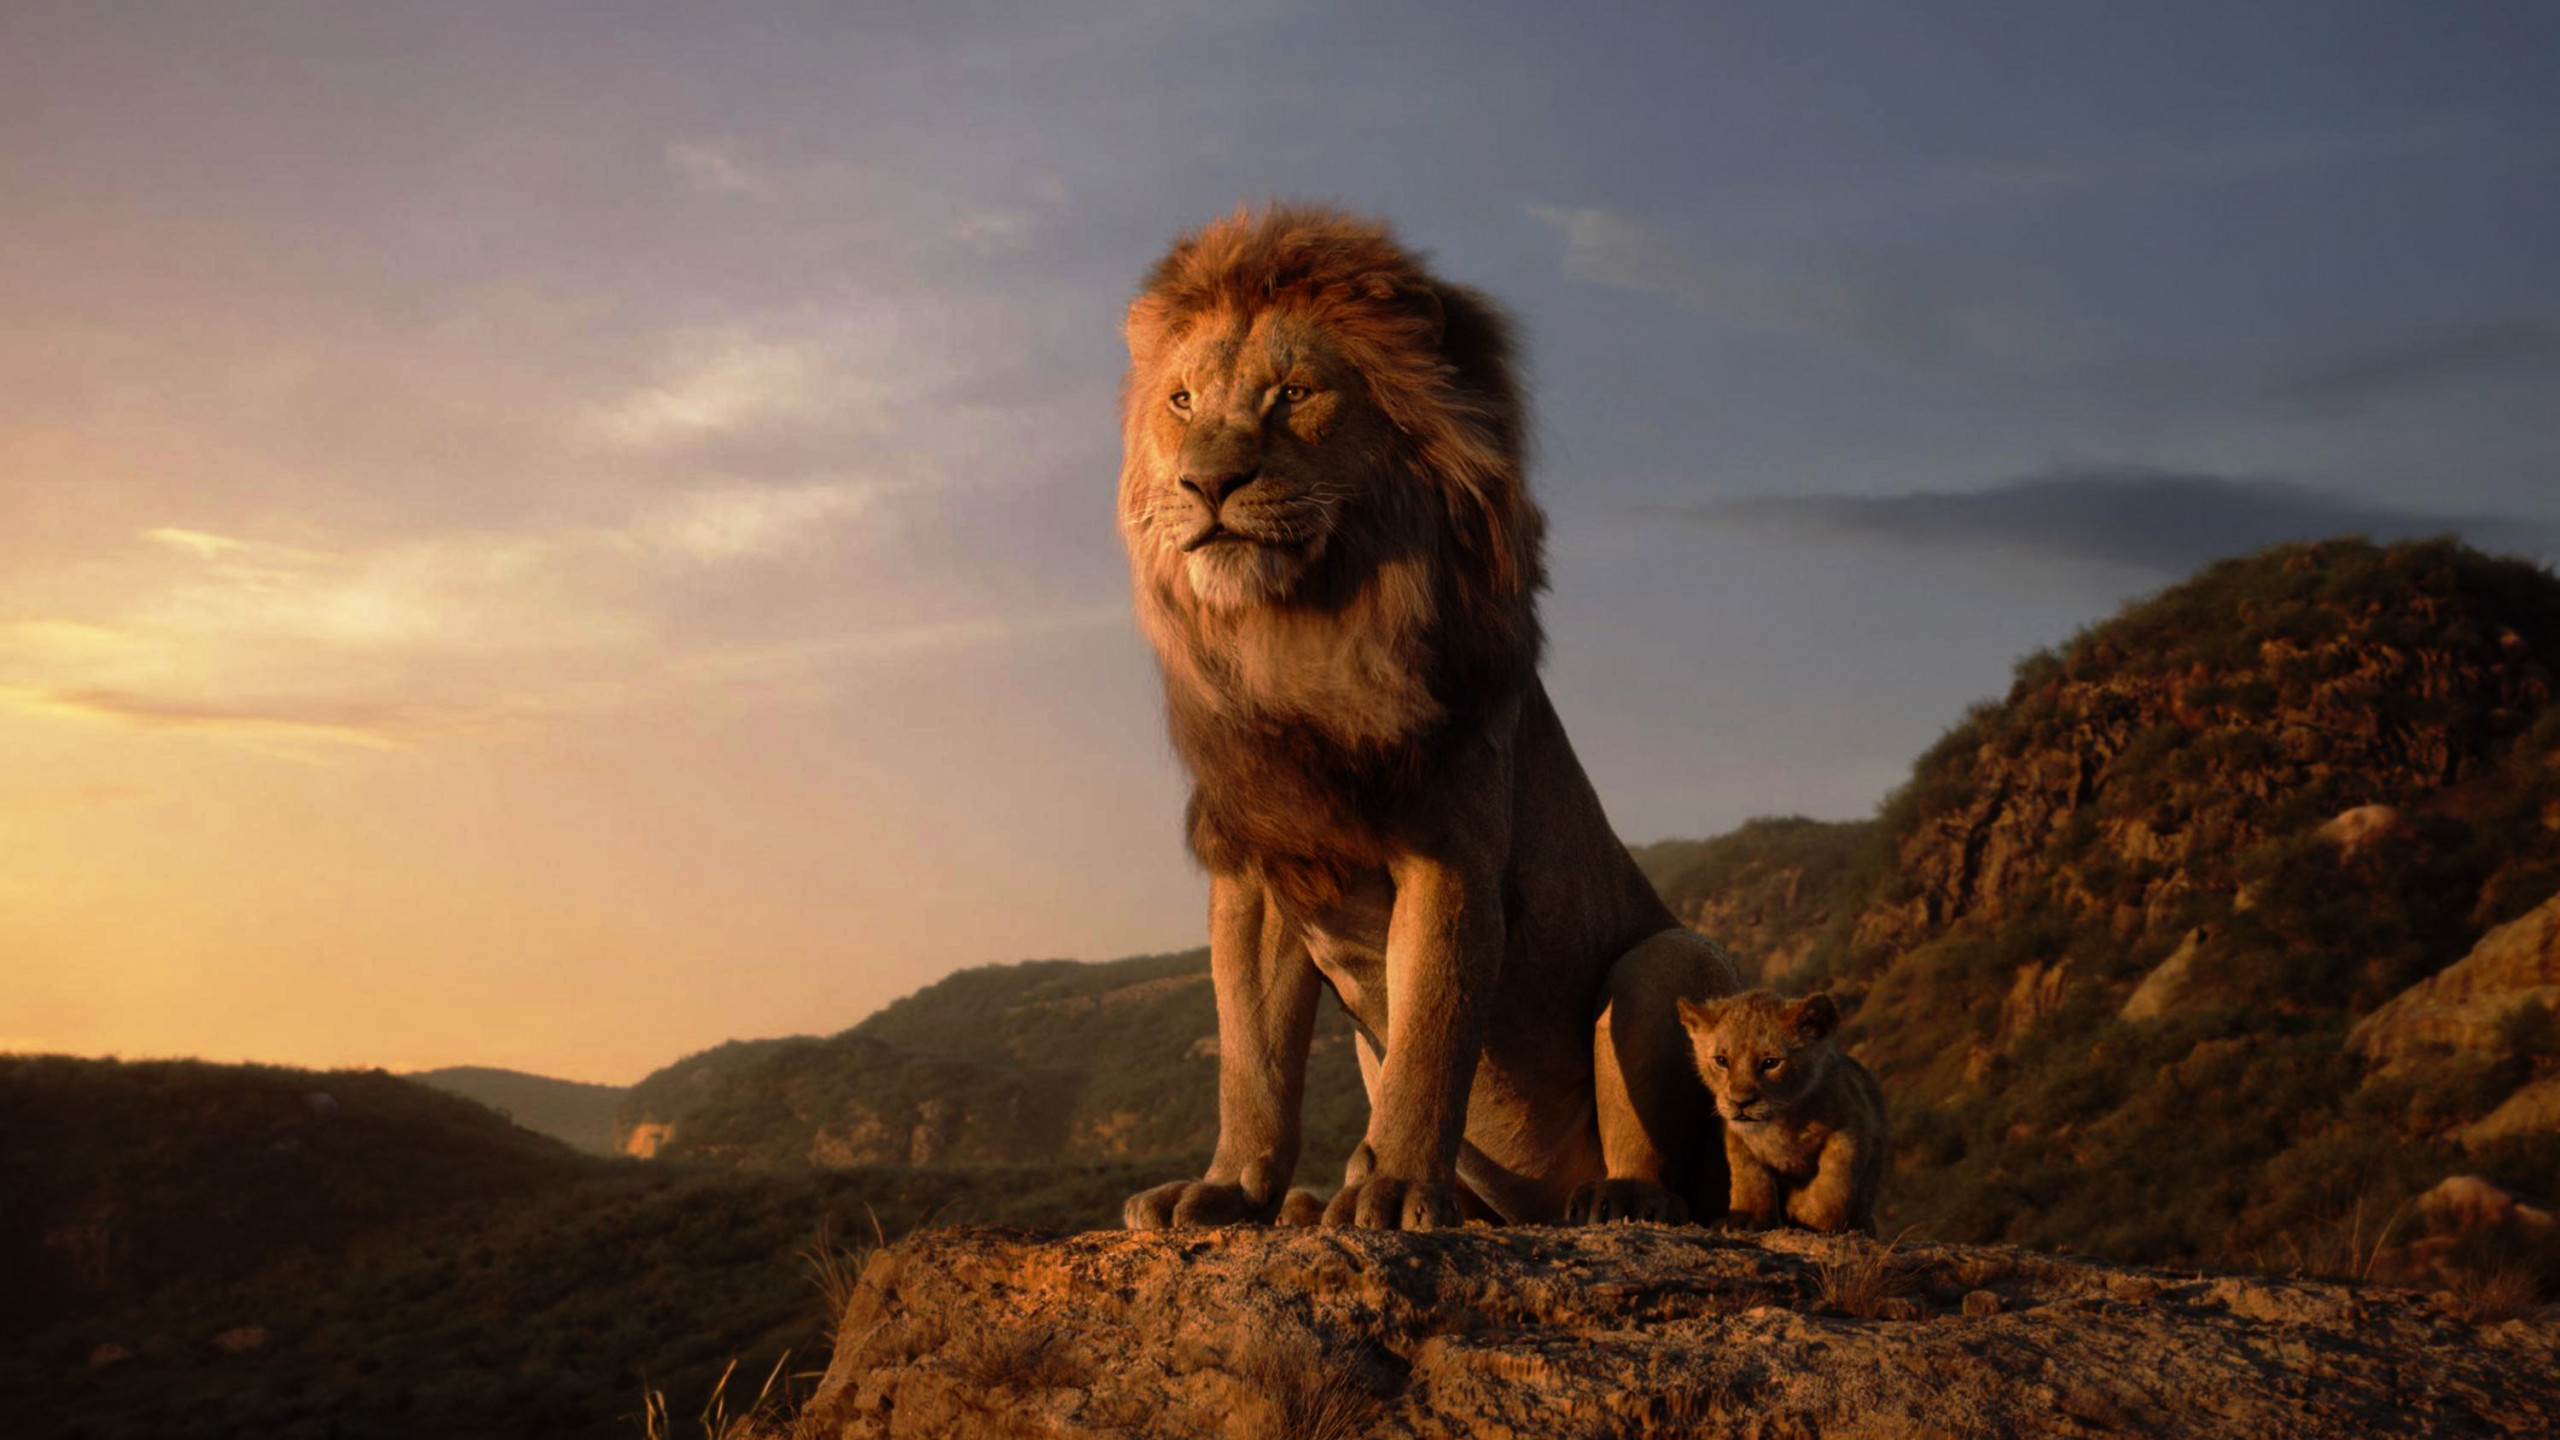 Wallpaper The Lion King, HD, Movies #21813